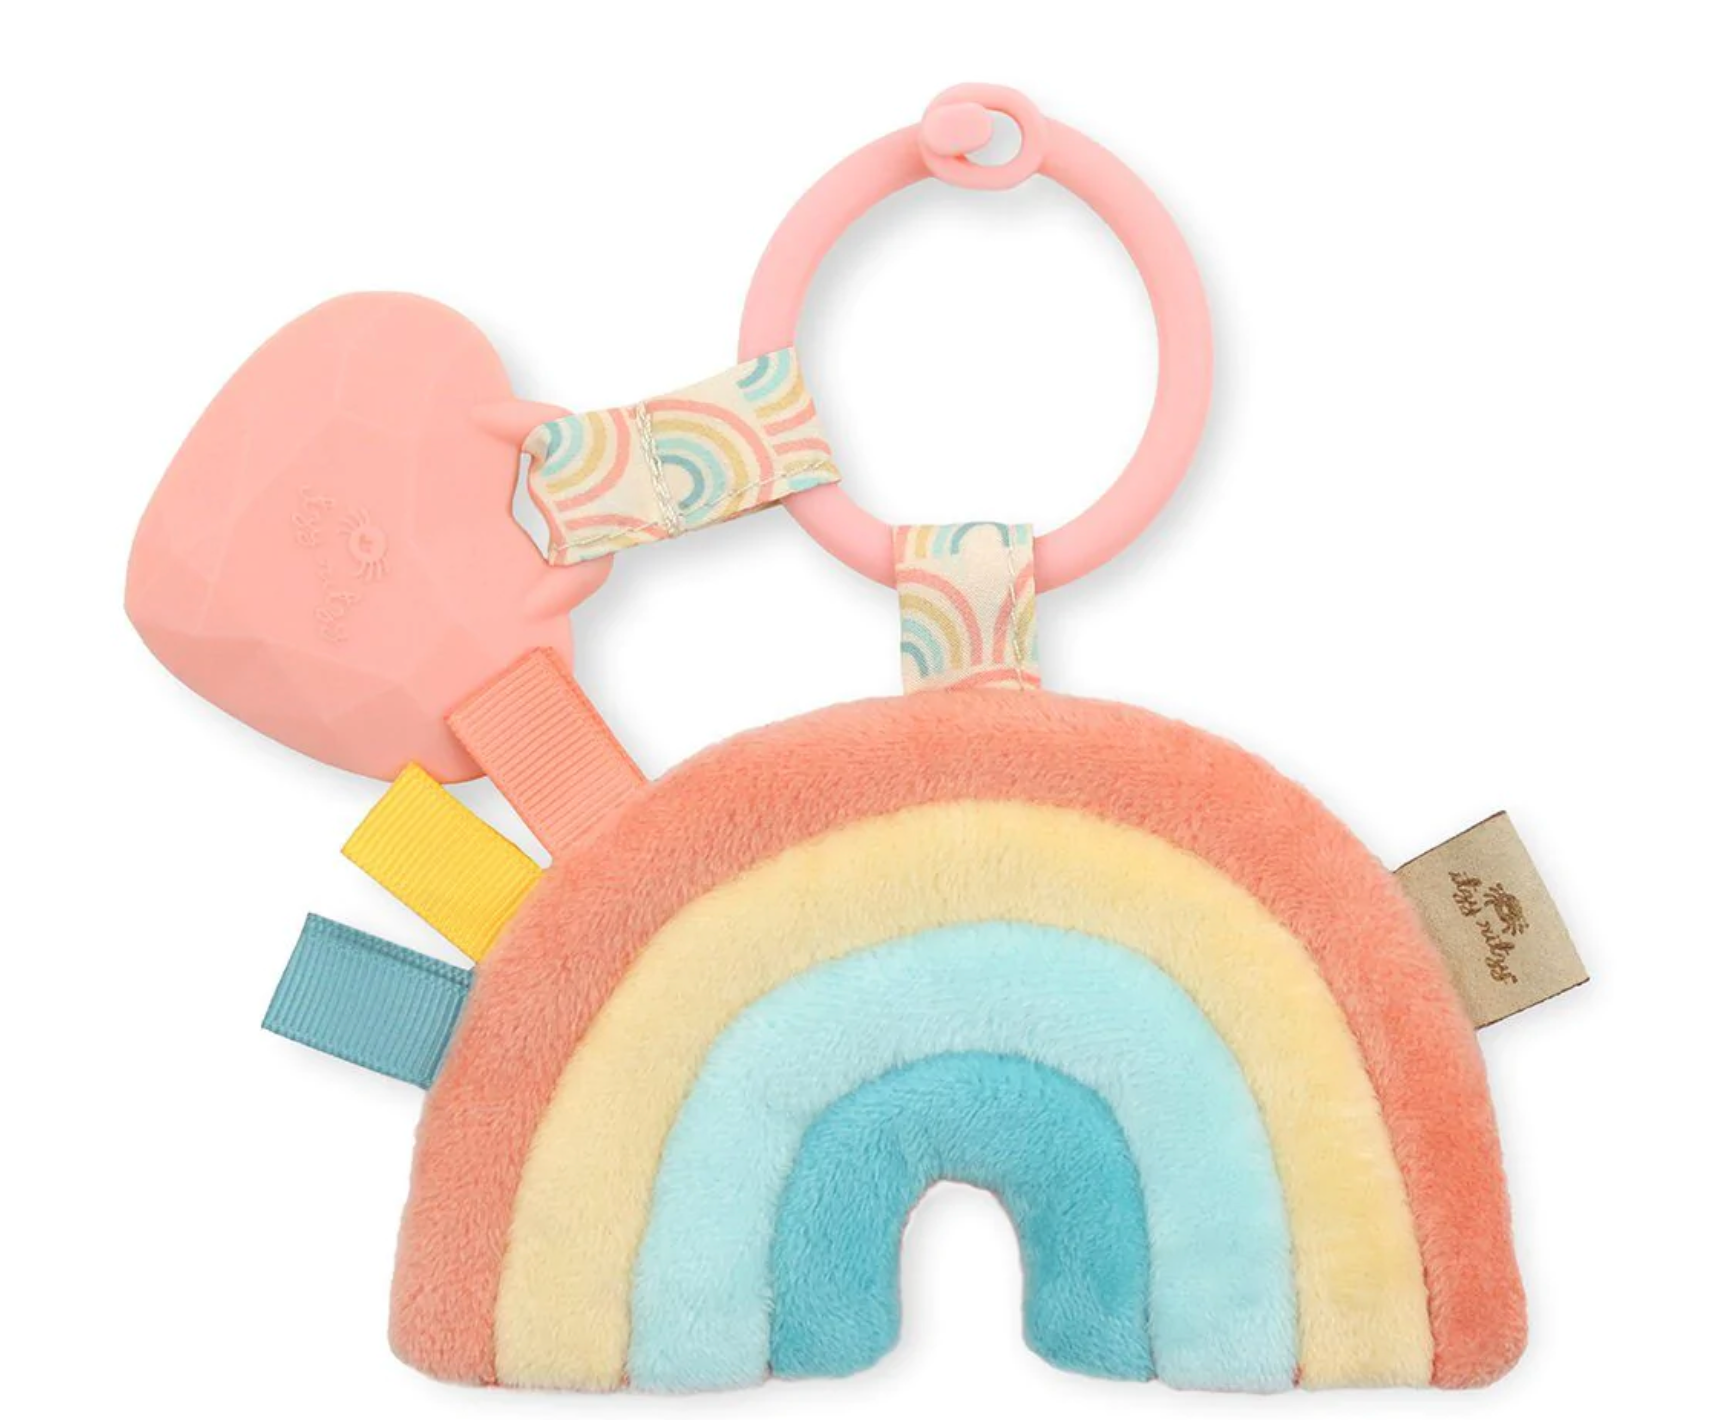 Plush and Teether Infant Toy